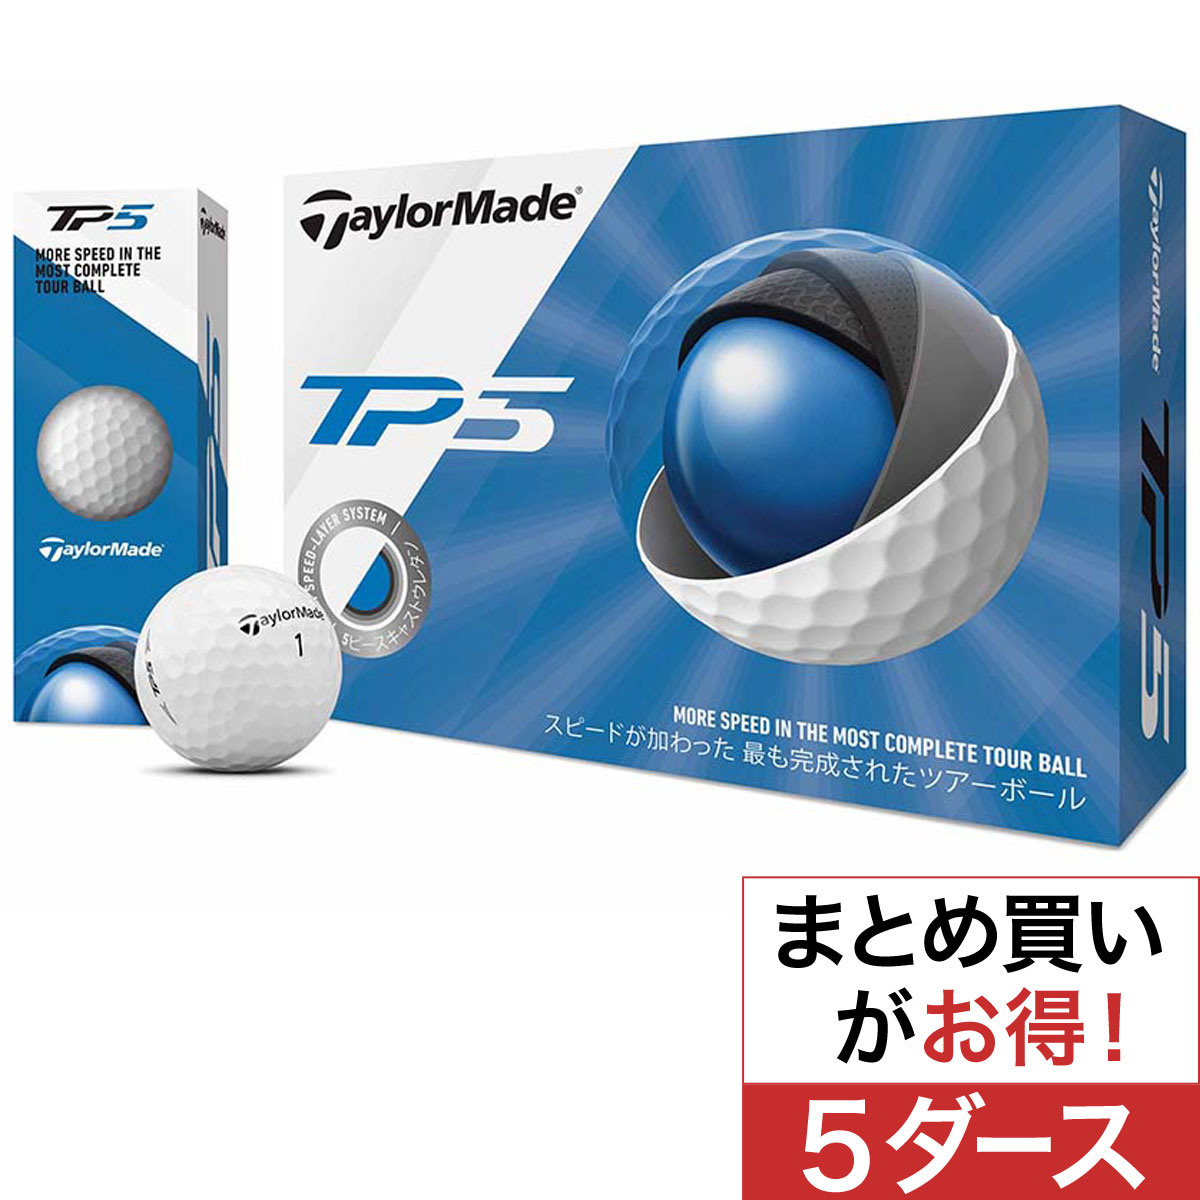  TP5 ボール 5ダースセット 